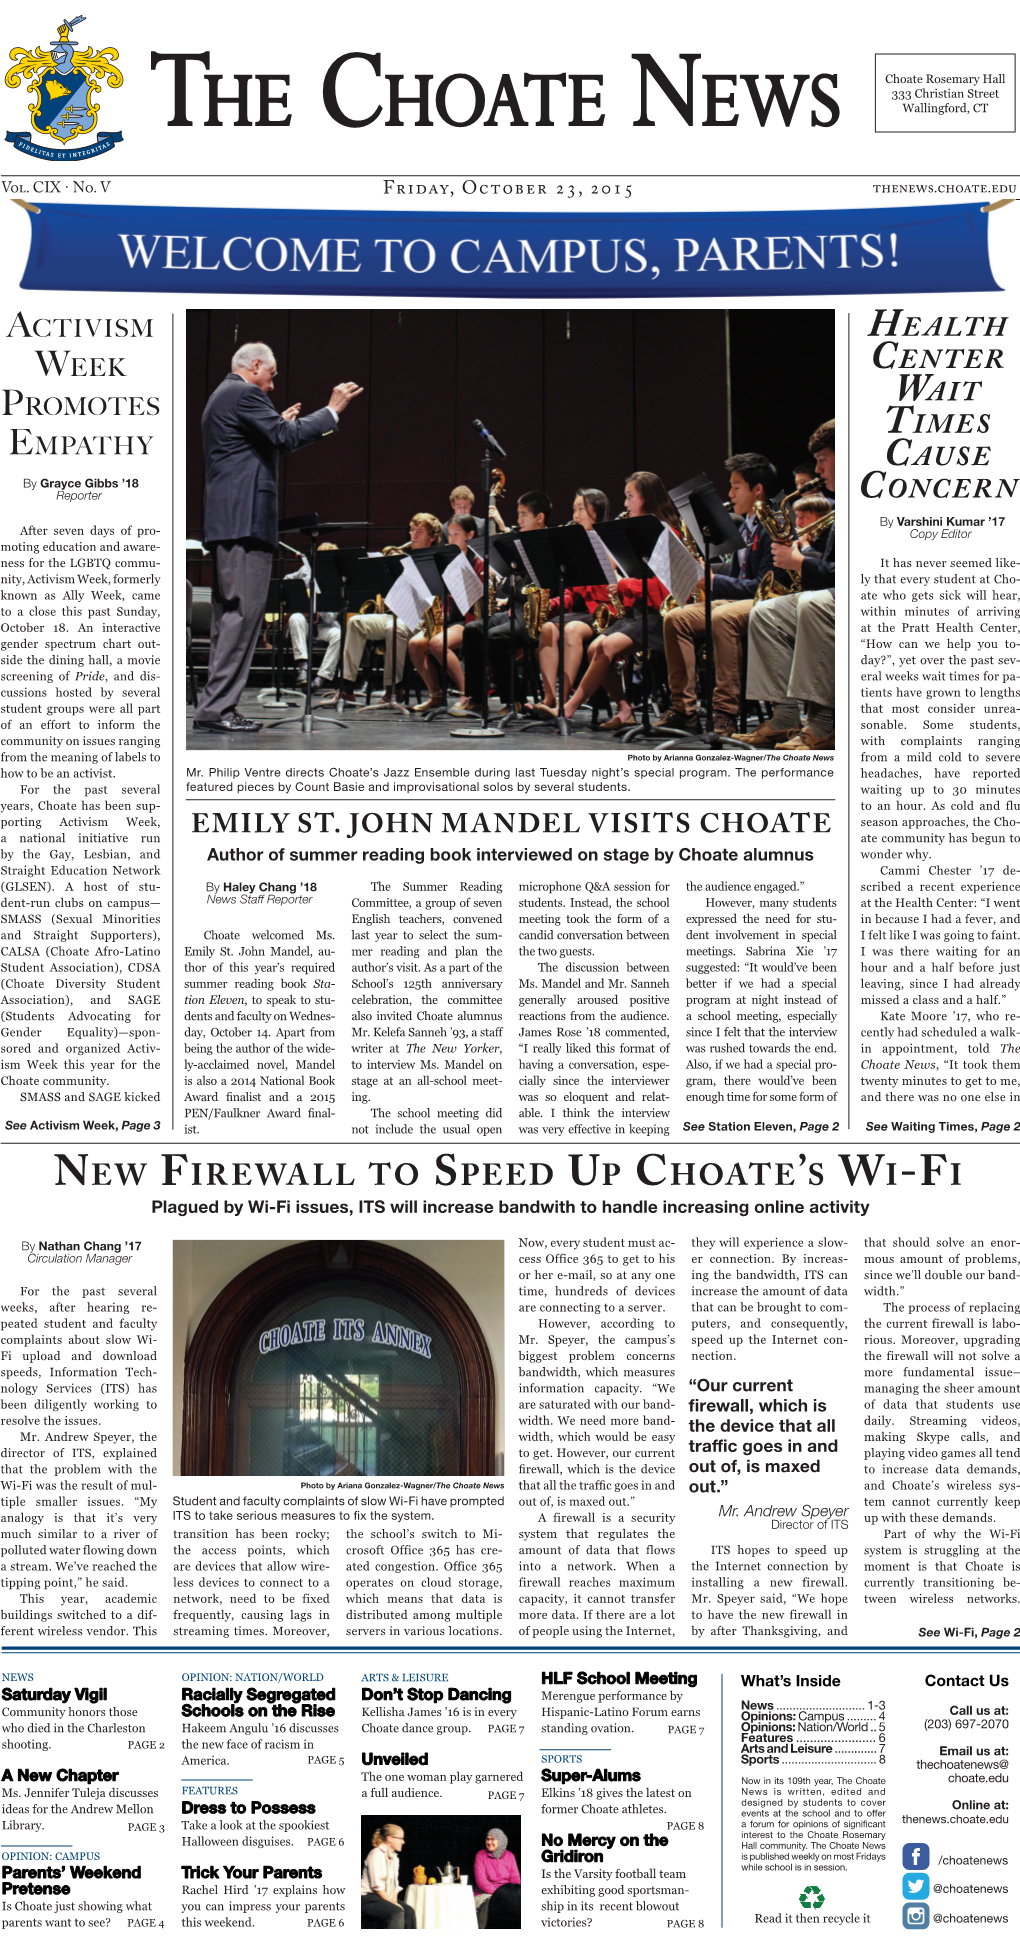 New Firewall to Speed up Choate's Wi-Fi